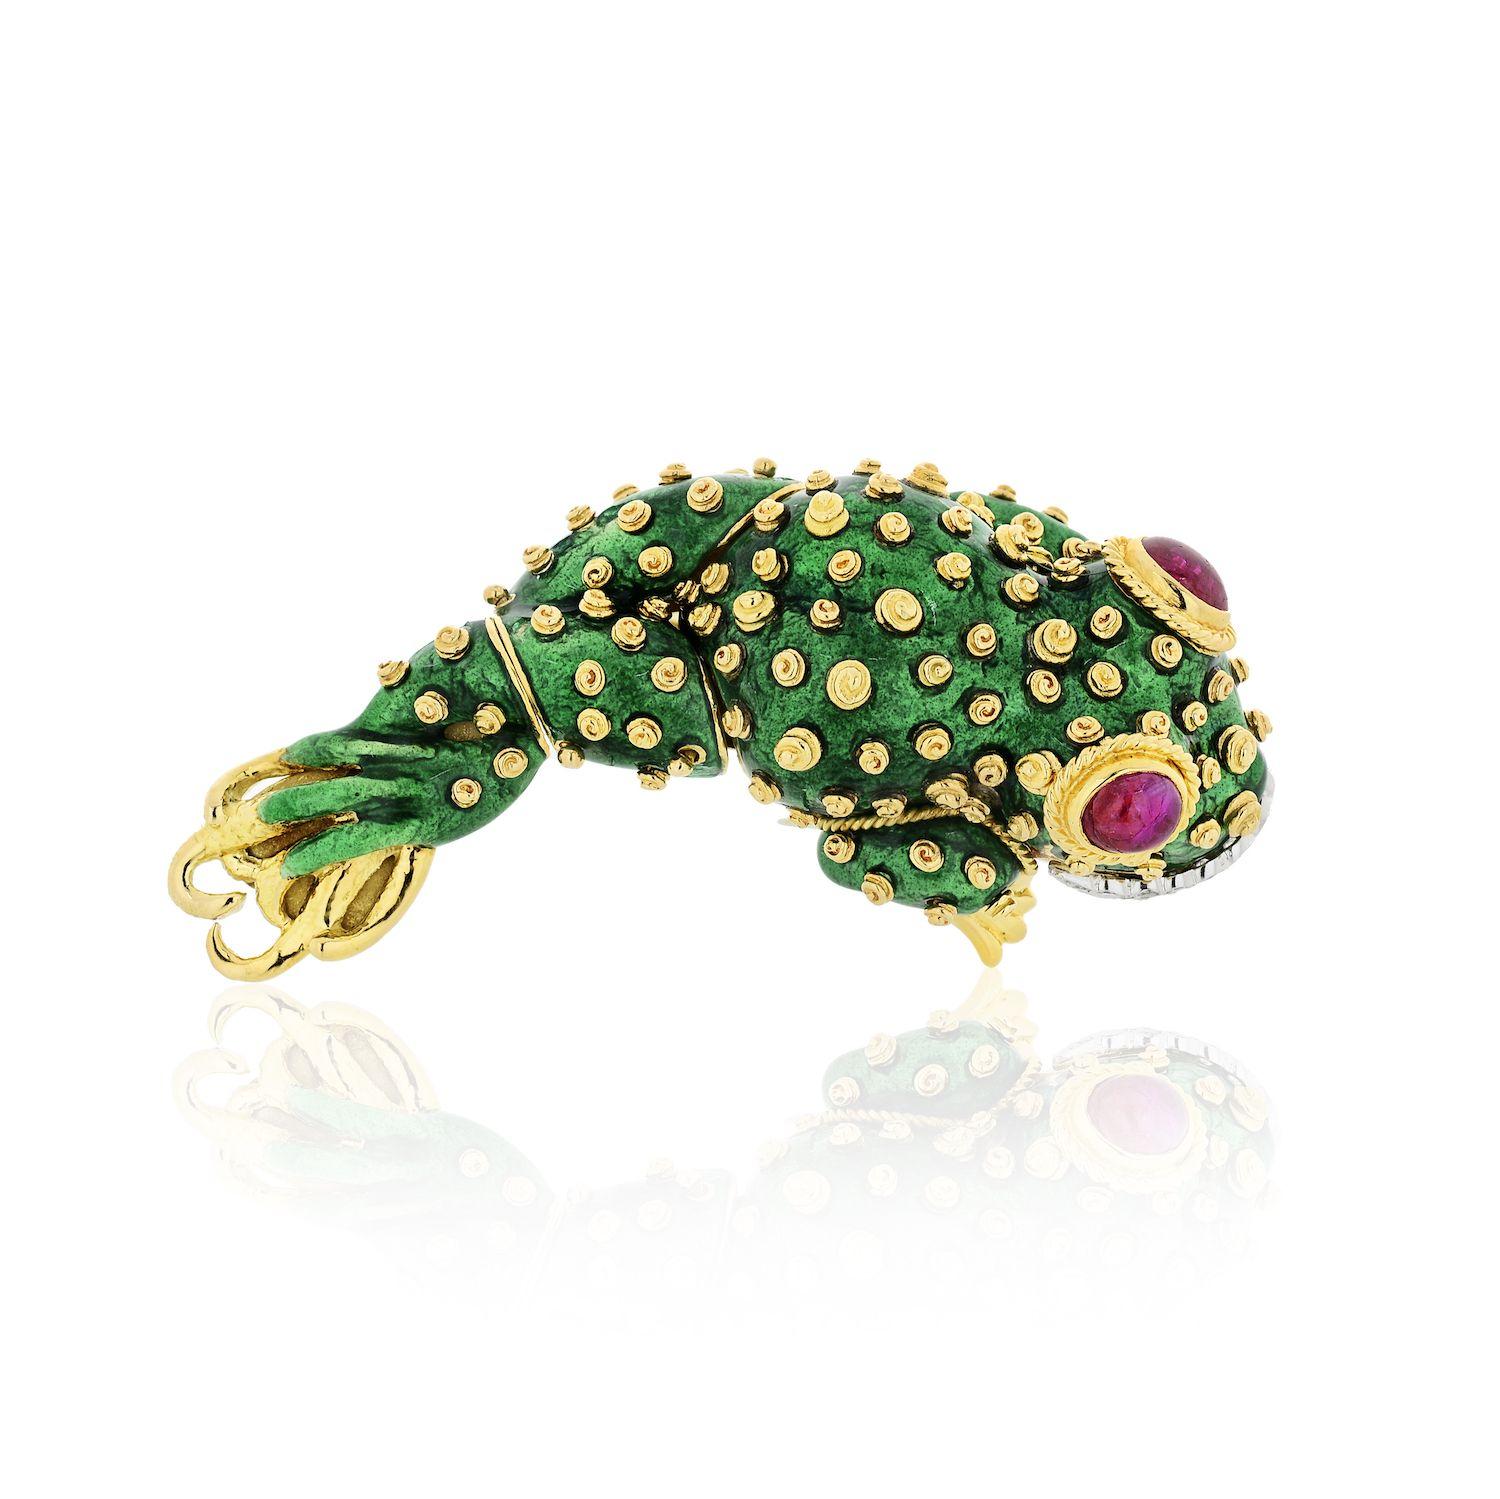 Gold, Platinum, Green Enamel, Ruby and Diamond Tadpole Brooch, David Webb
18 kt., the stylized tadpole applied with green enamel and applied gold spiral spots, with two collet-set oval cabochon ruby eyes further edged by twisted gold, its platinum